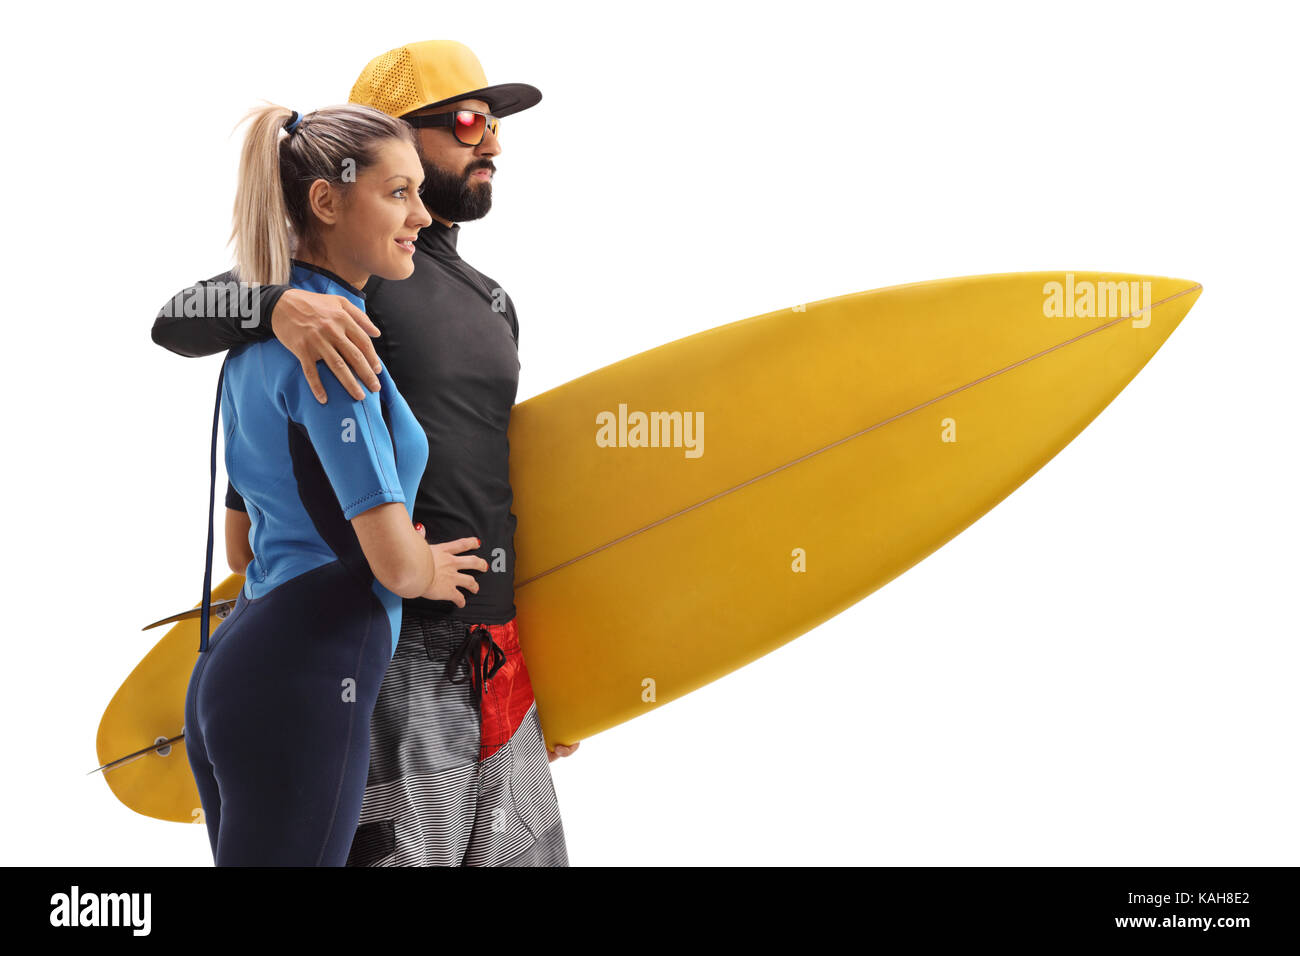 Female and a male surfer with a surfboard isolated on white background Stock Photo